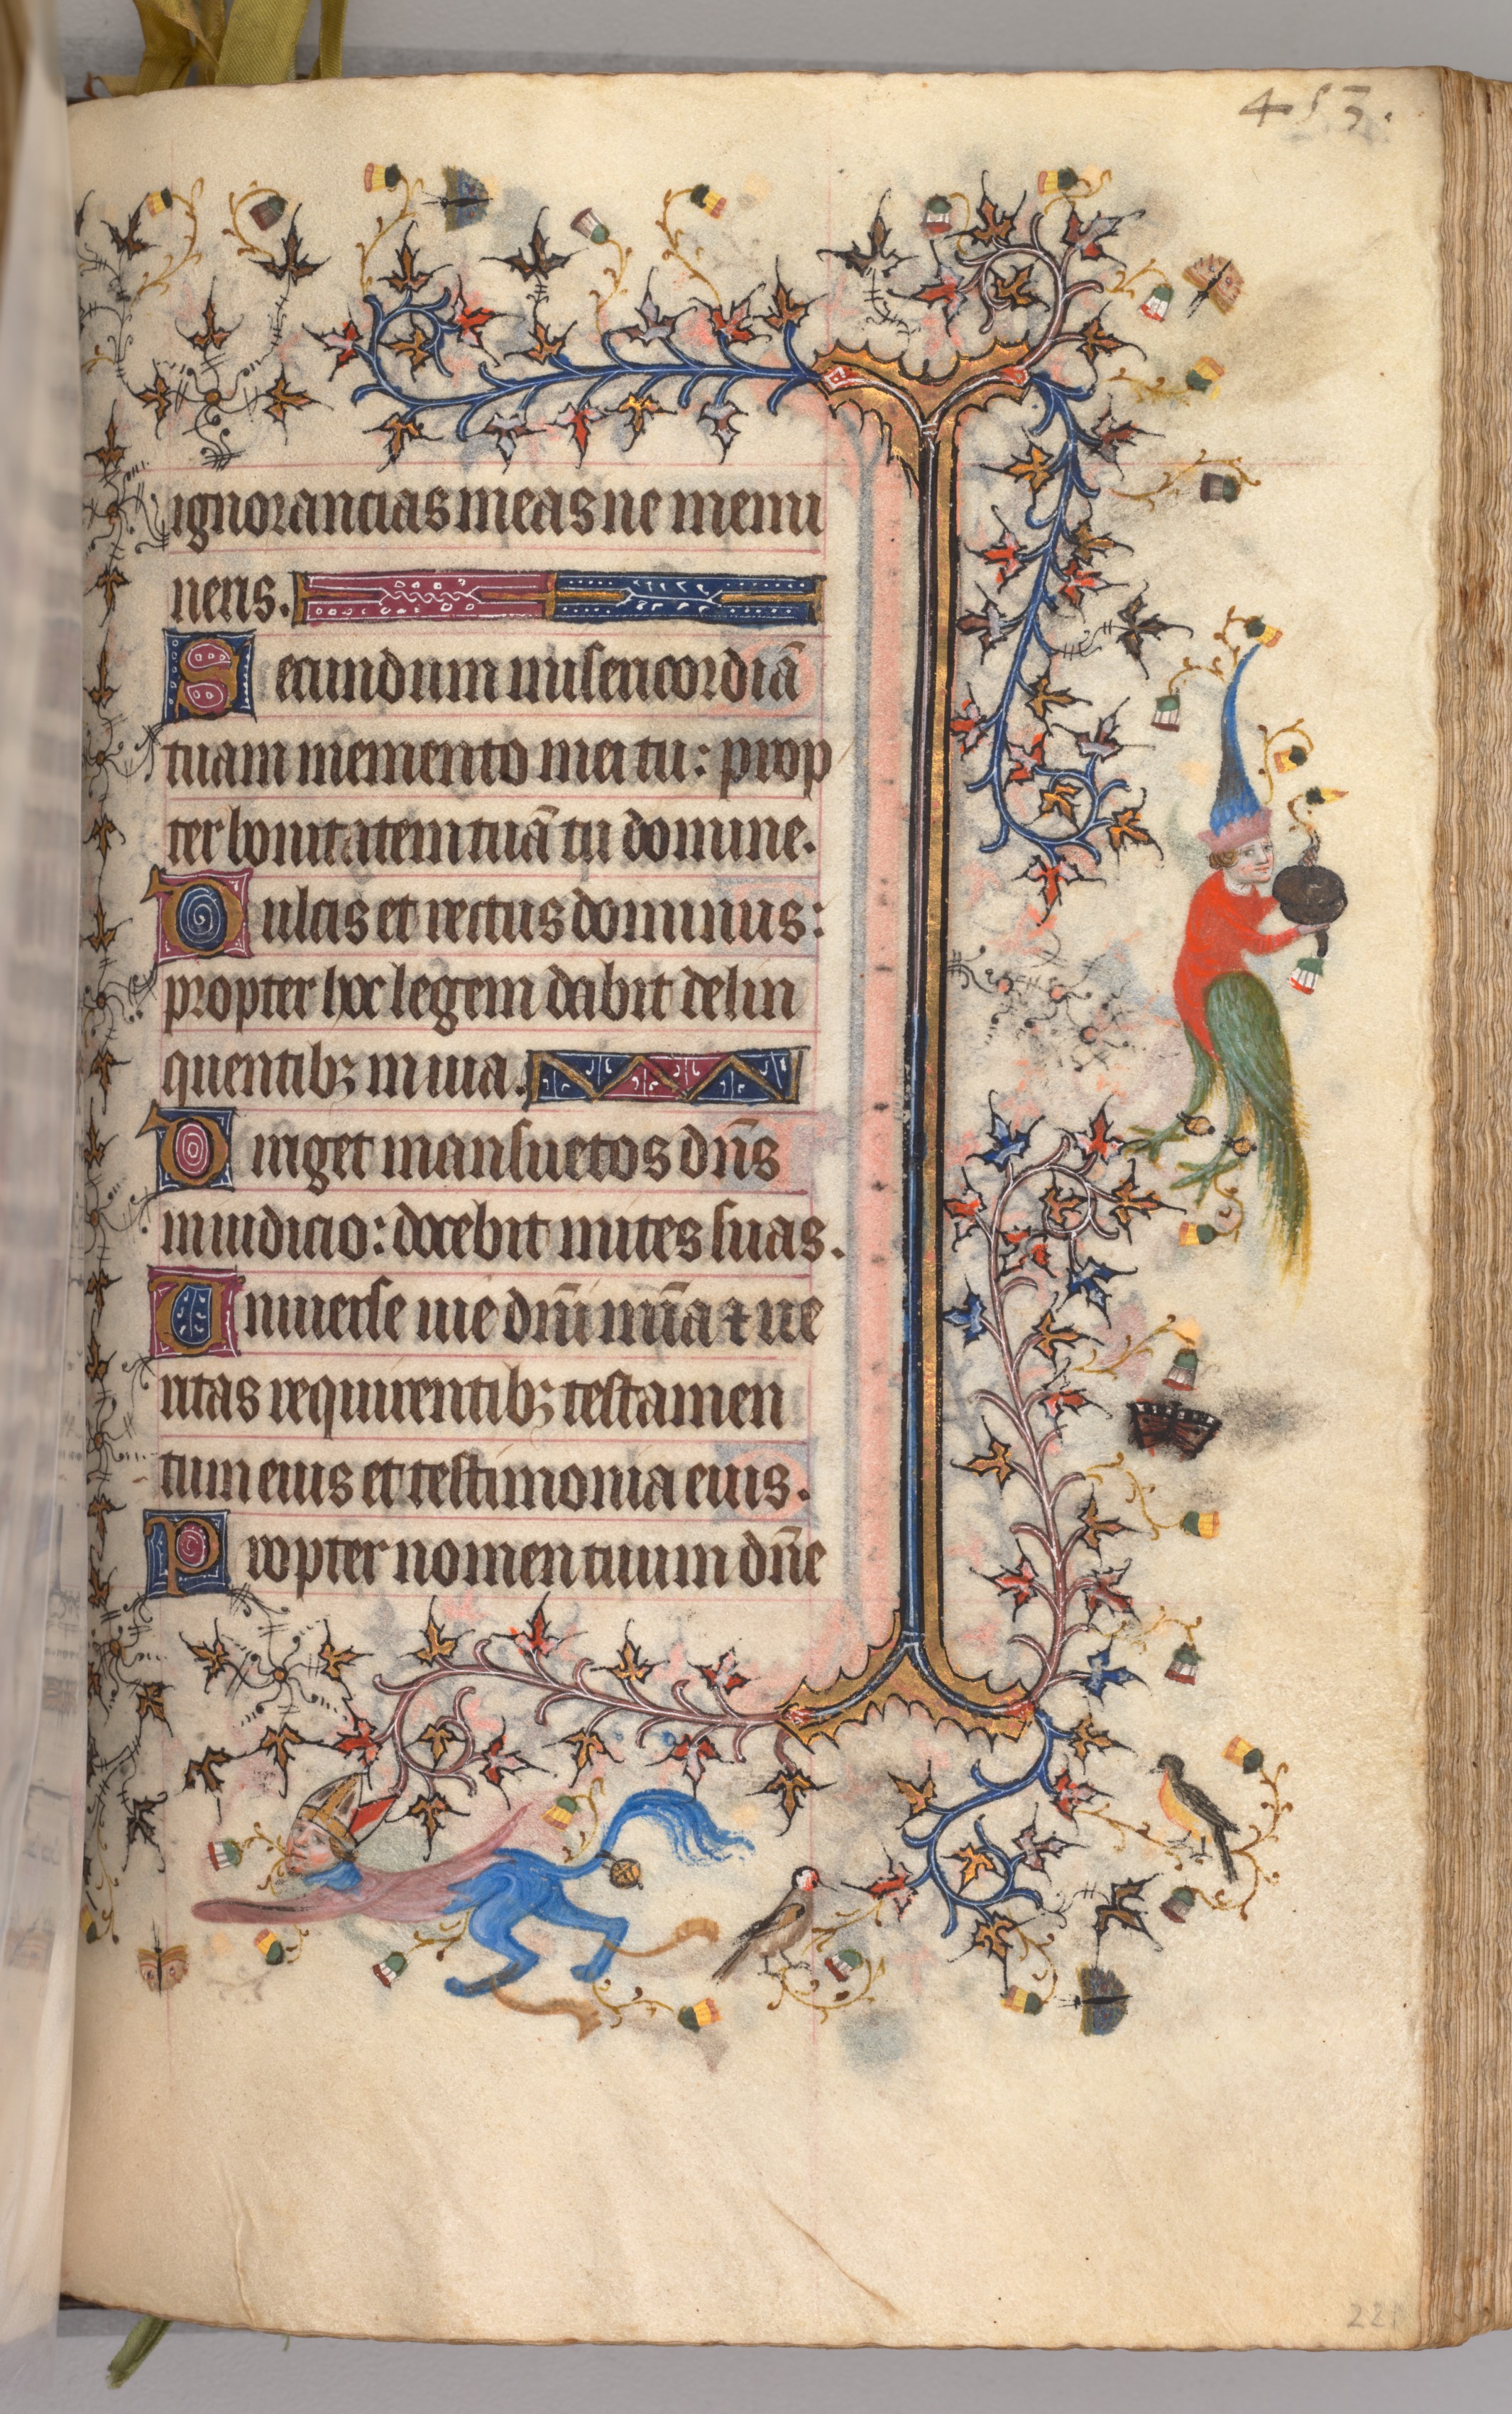 Hours of Charles the Noble, King of Navarre (1361-1425): fol. 221r, Text